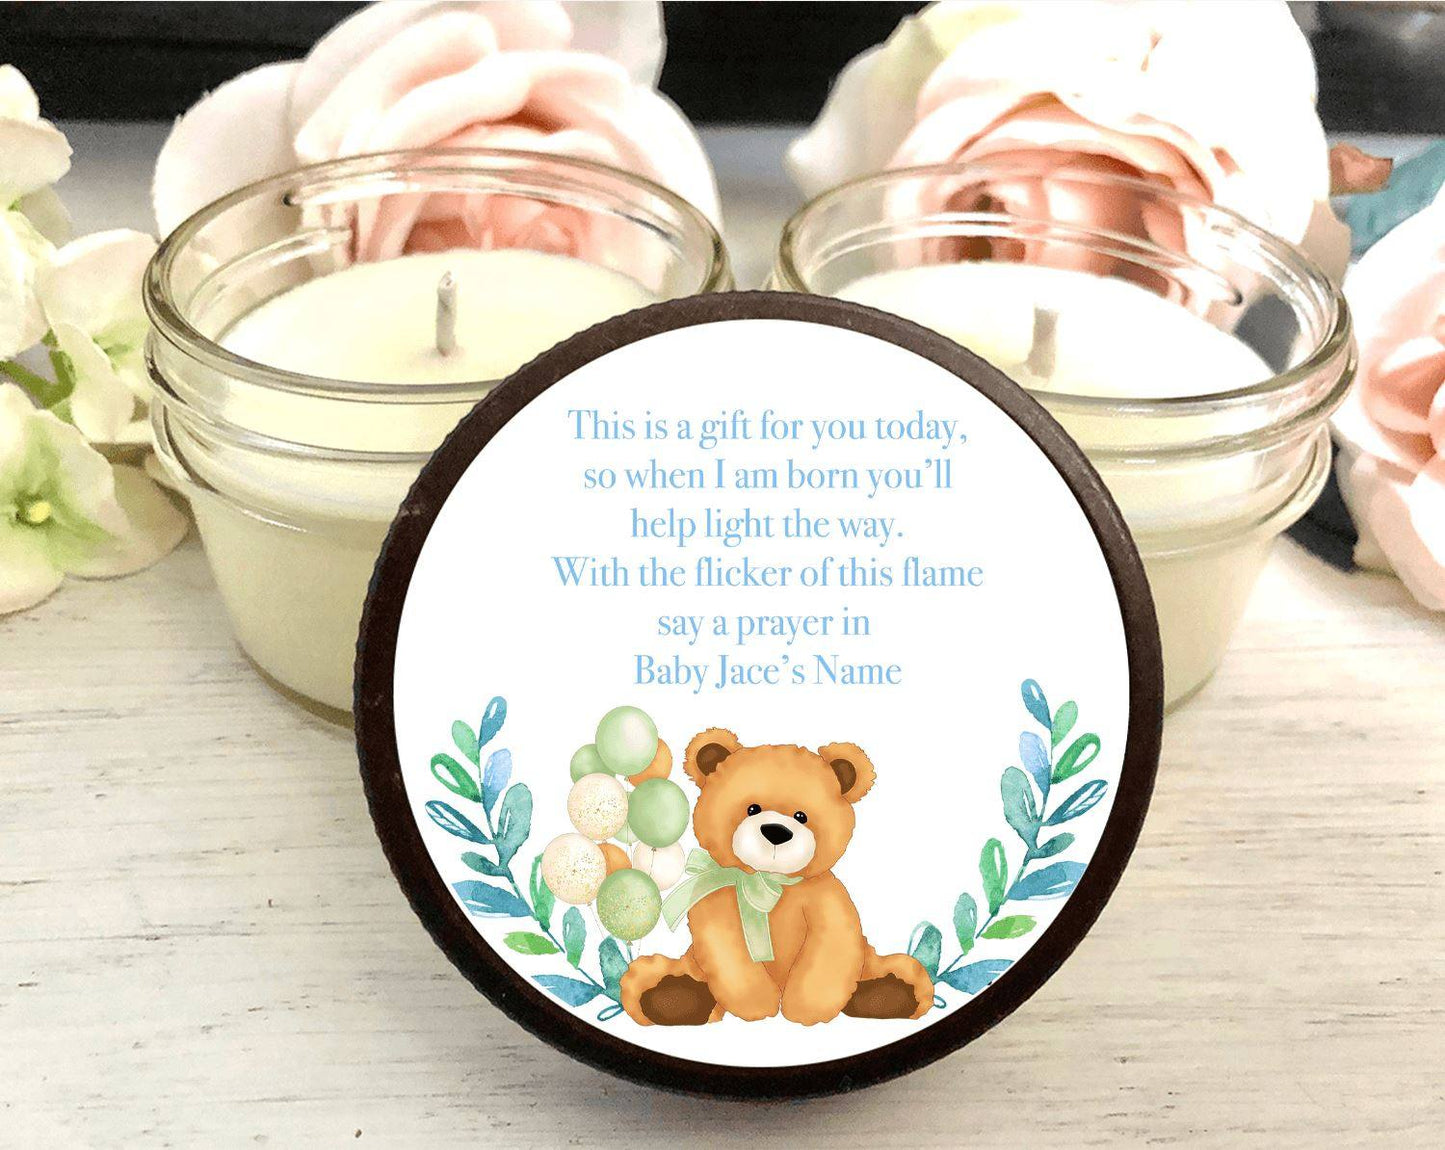 Set of Two 2 Teddy Bear Candles by Candle Compliments.